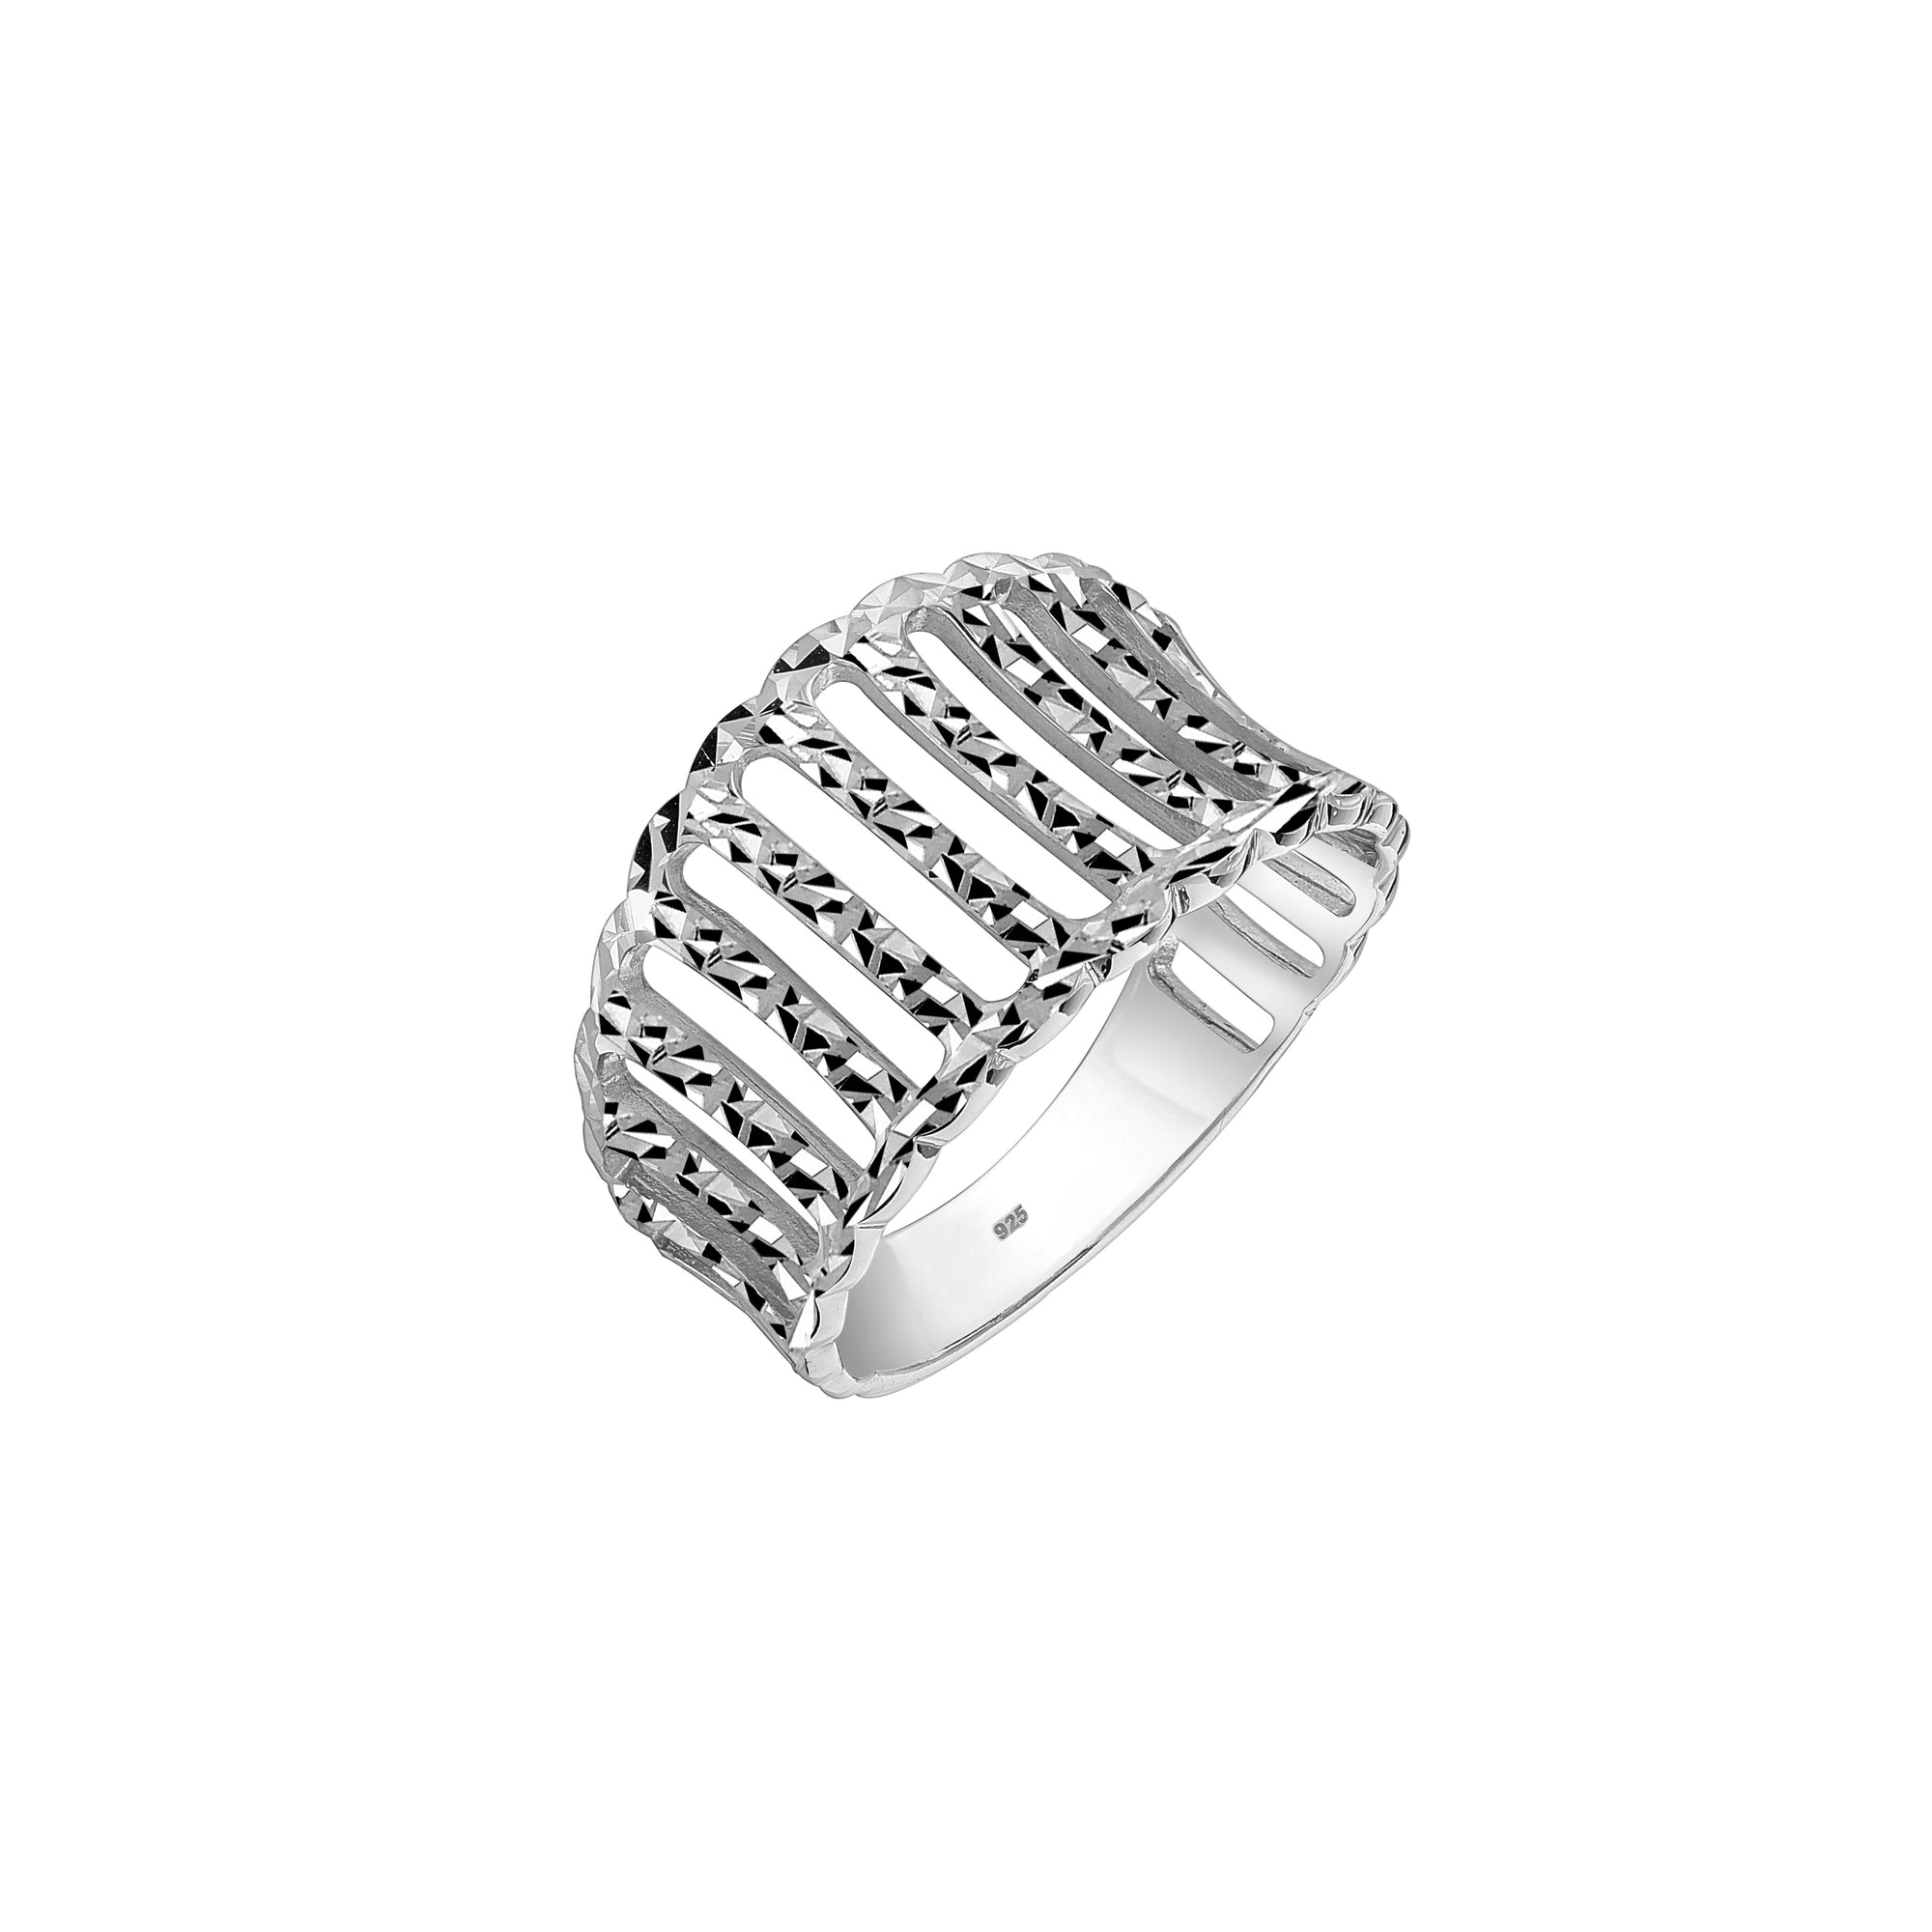 925 STERLING SILVER CAST RING WITH DIAMOND CUT